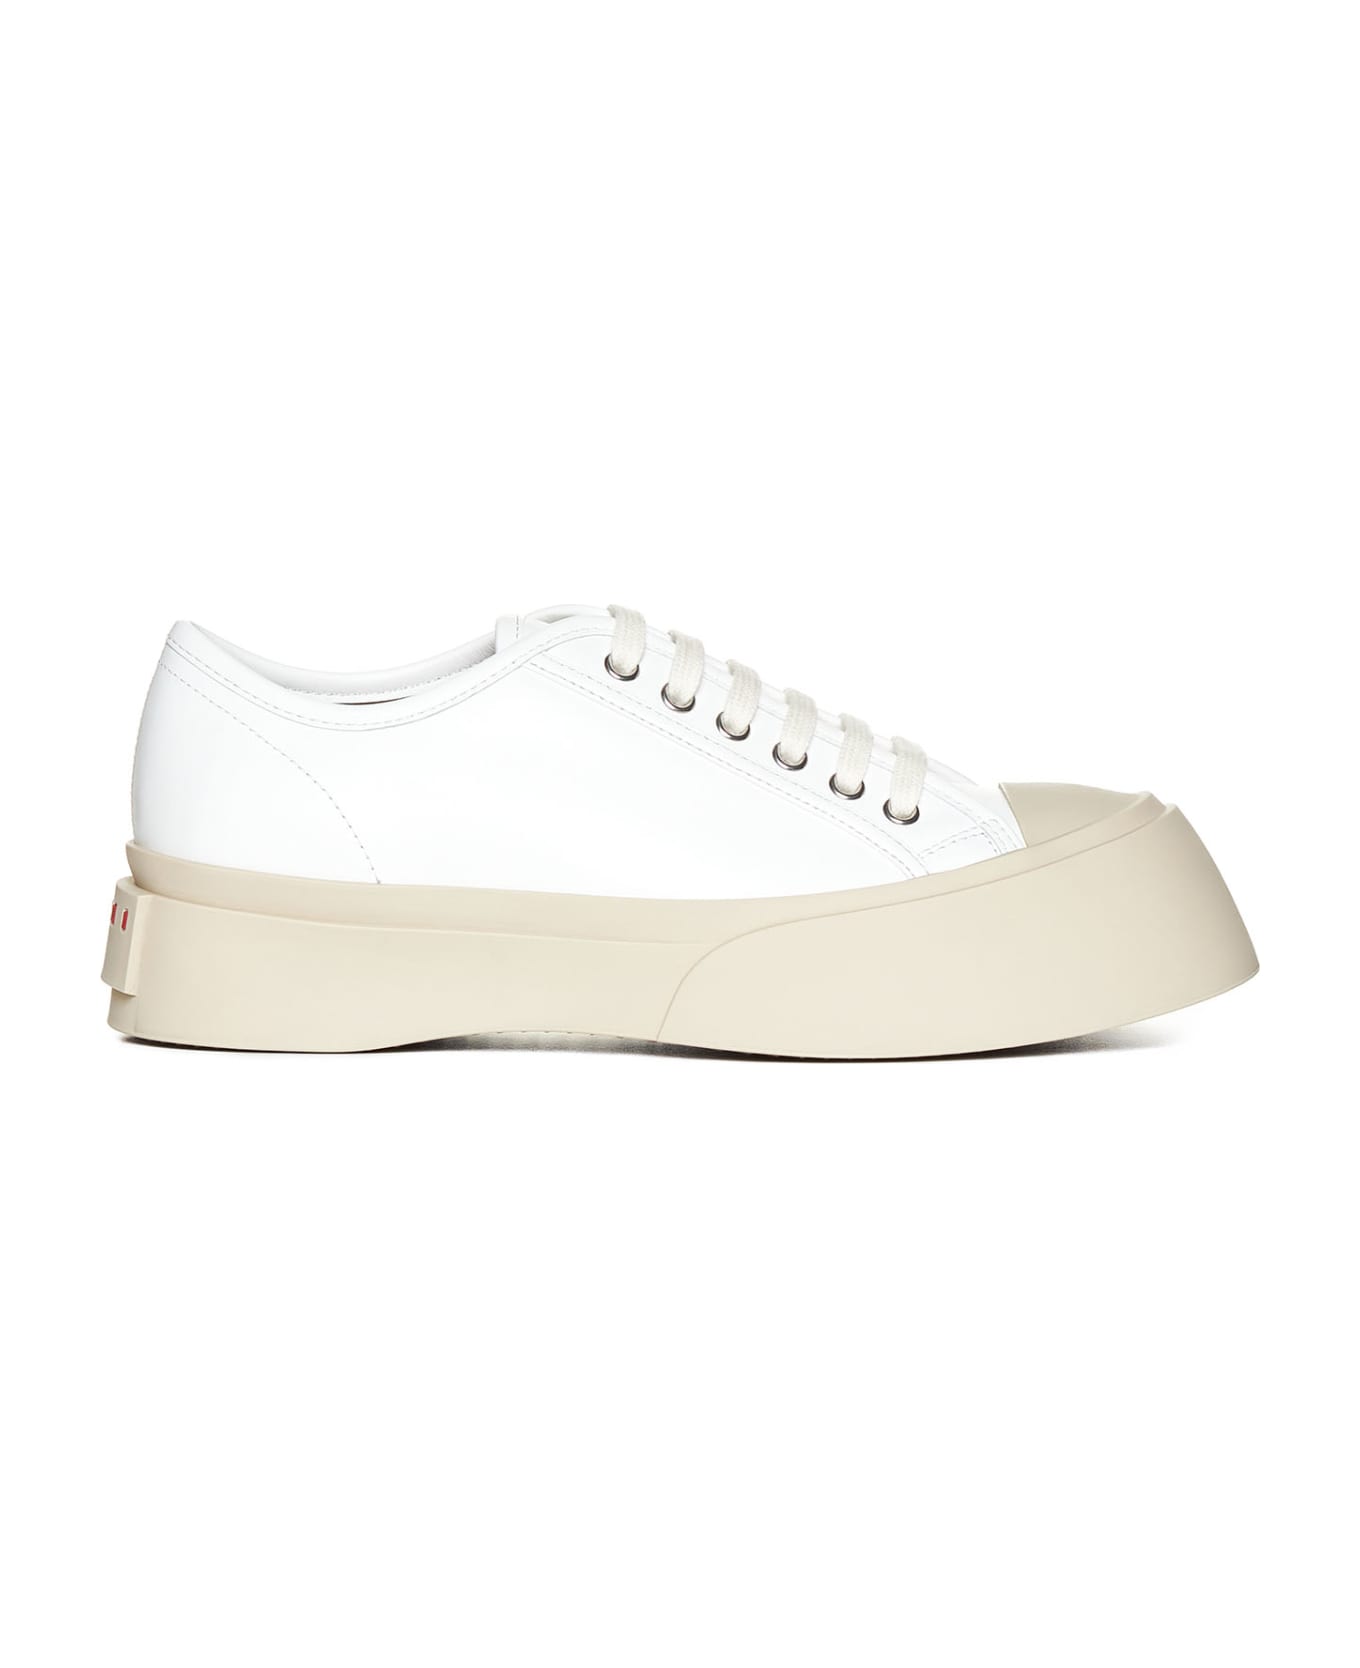 Marni Sneakers - Lily white ウェッジシューズ